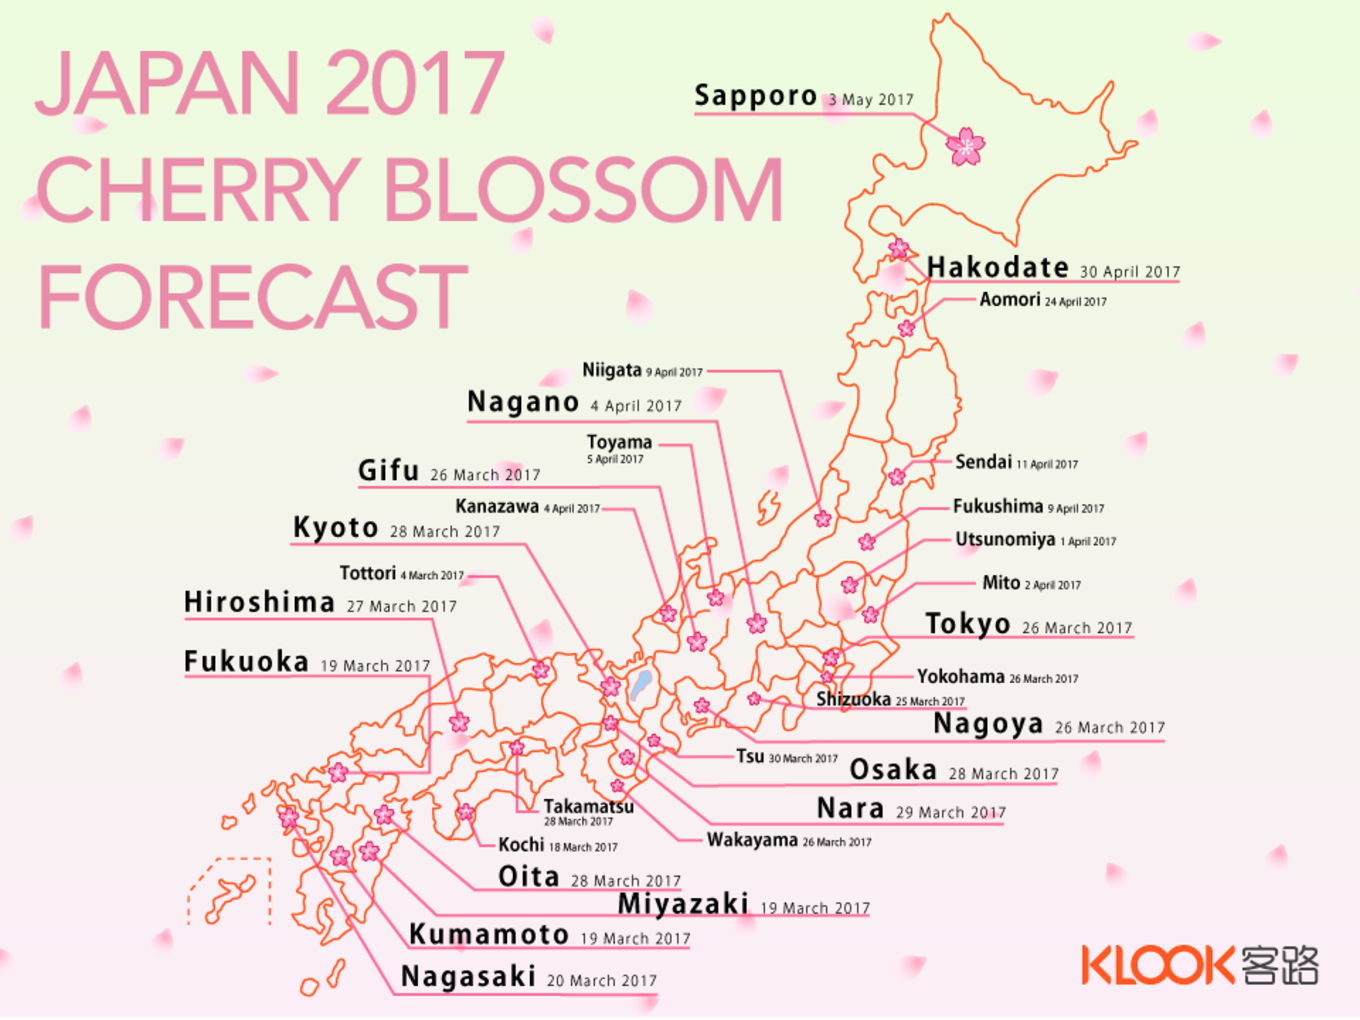 10 Best Places To Catch Cherry Blossoms In Japan - Klook Travel Blog